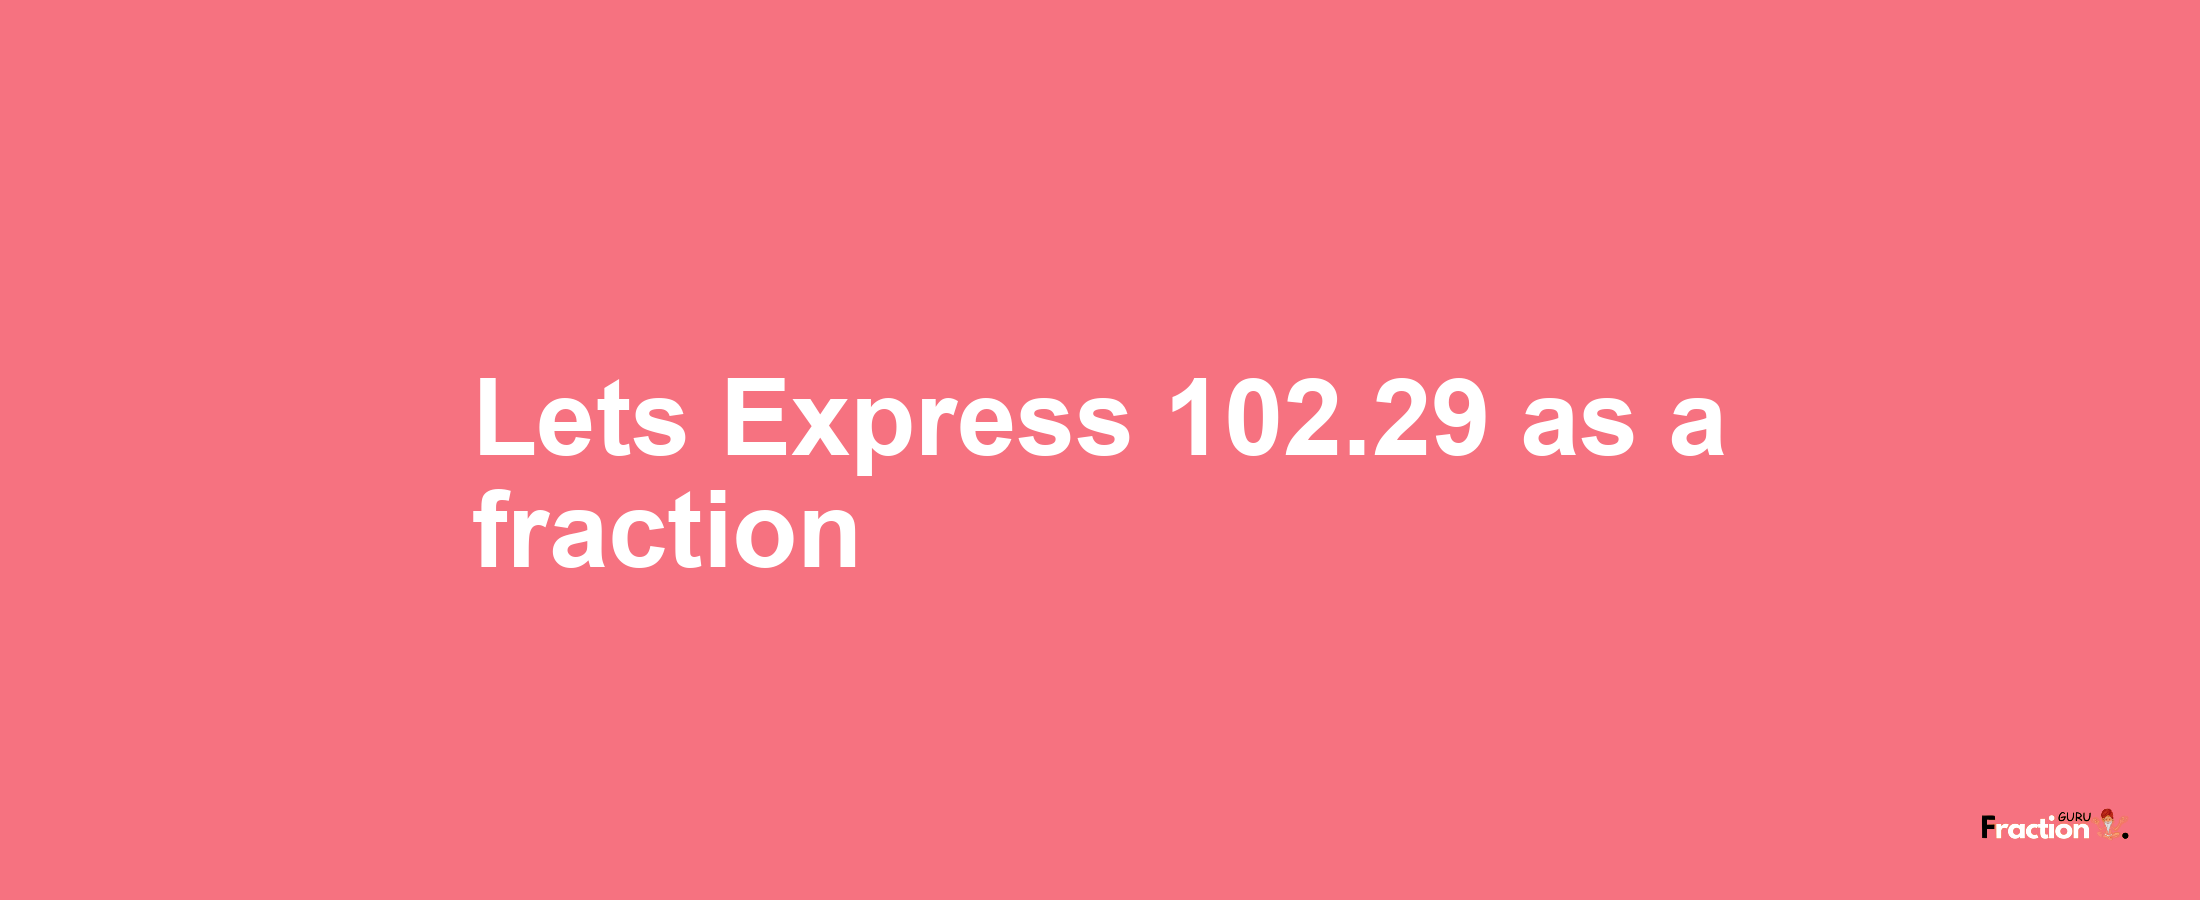 Lets Express 102.29 as afraction